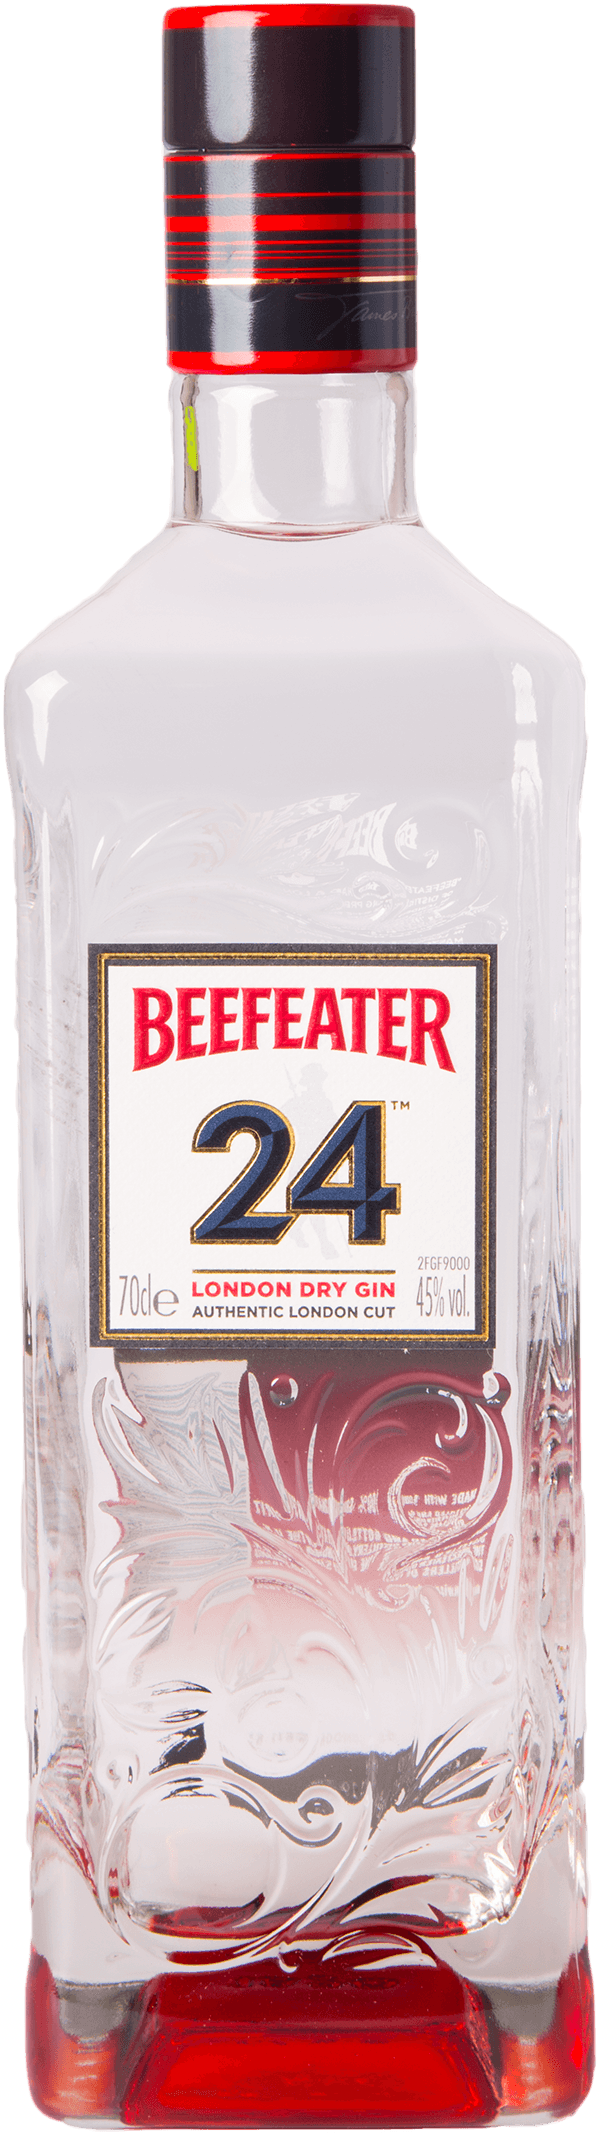 Beefeater 24 London Dry Gin 45%